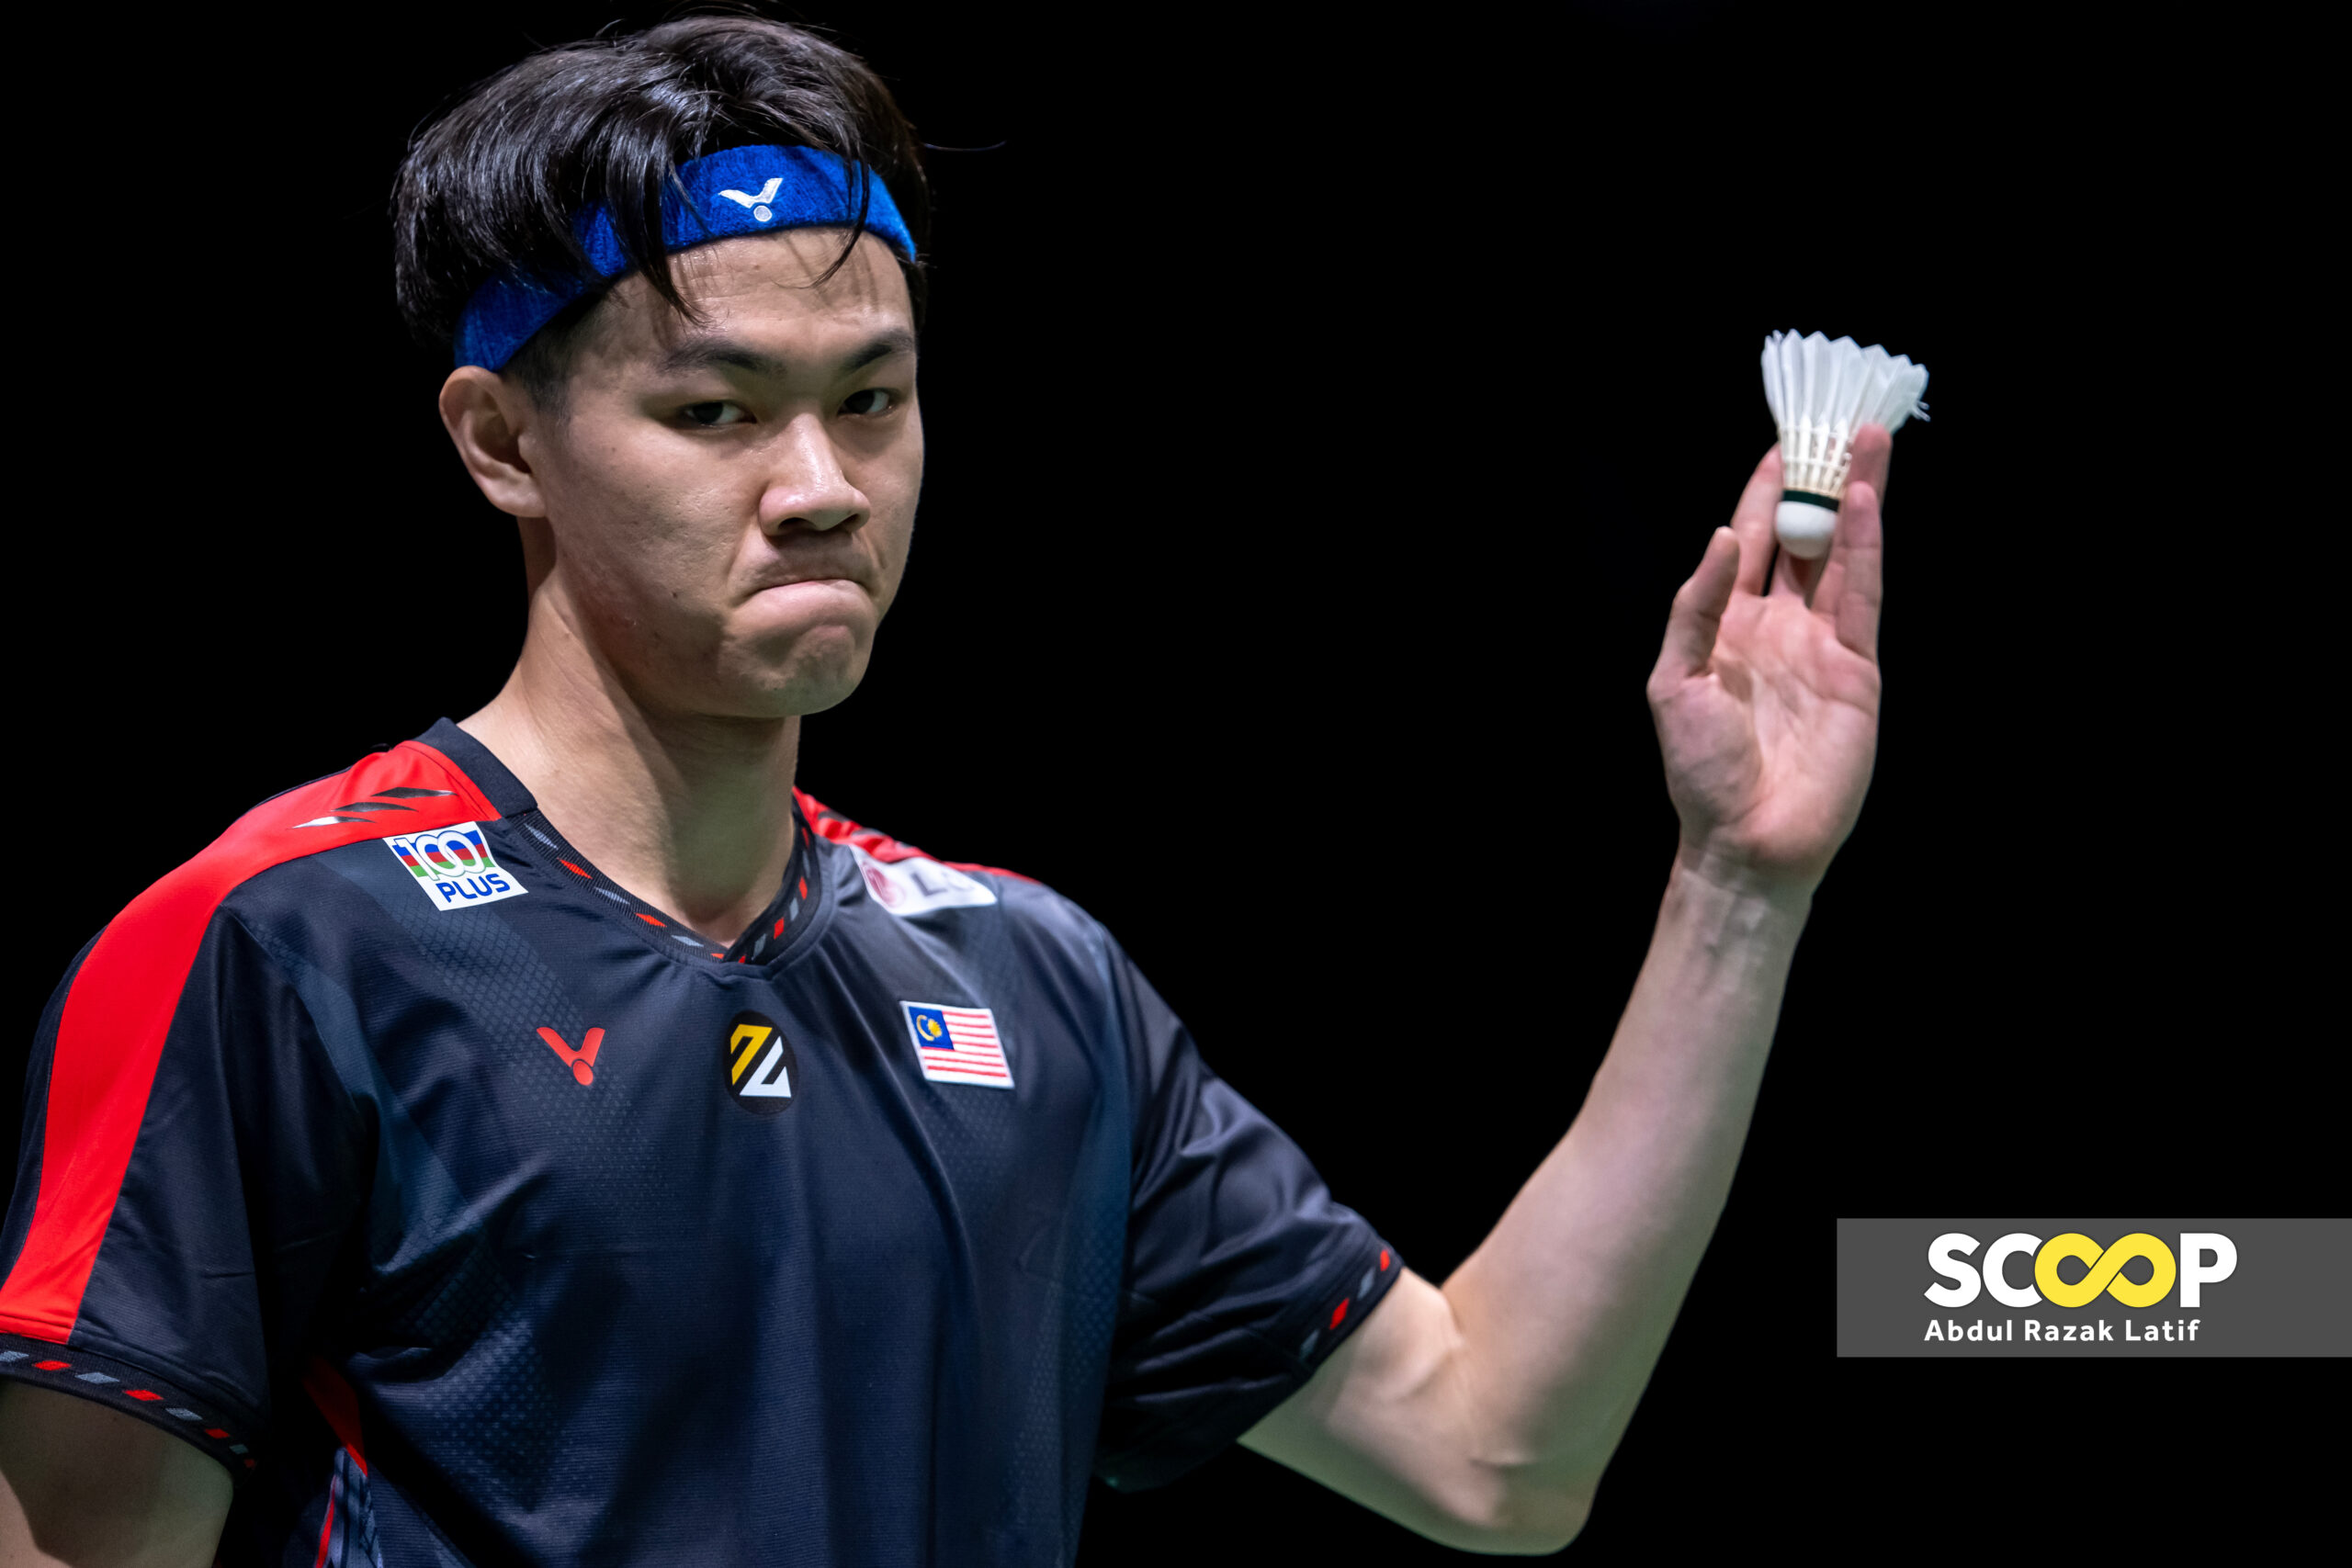 [UPDATED] Indonesia Masters: Zii Jia retires from quarterfinal match